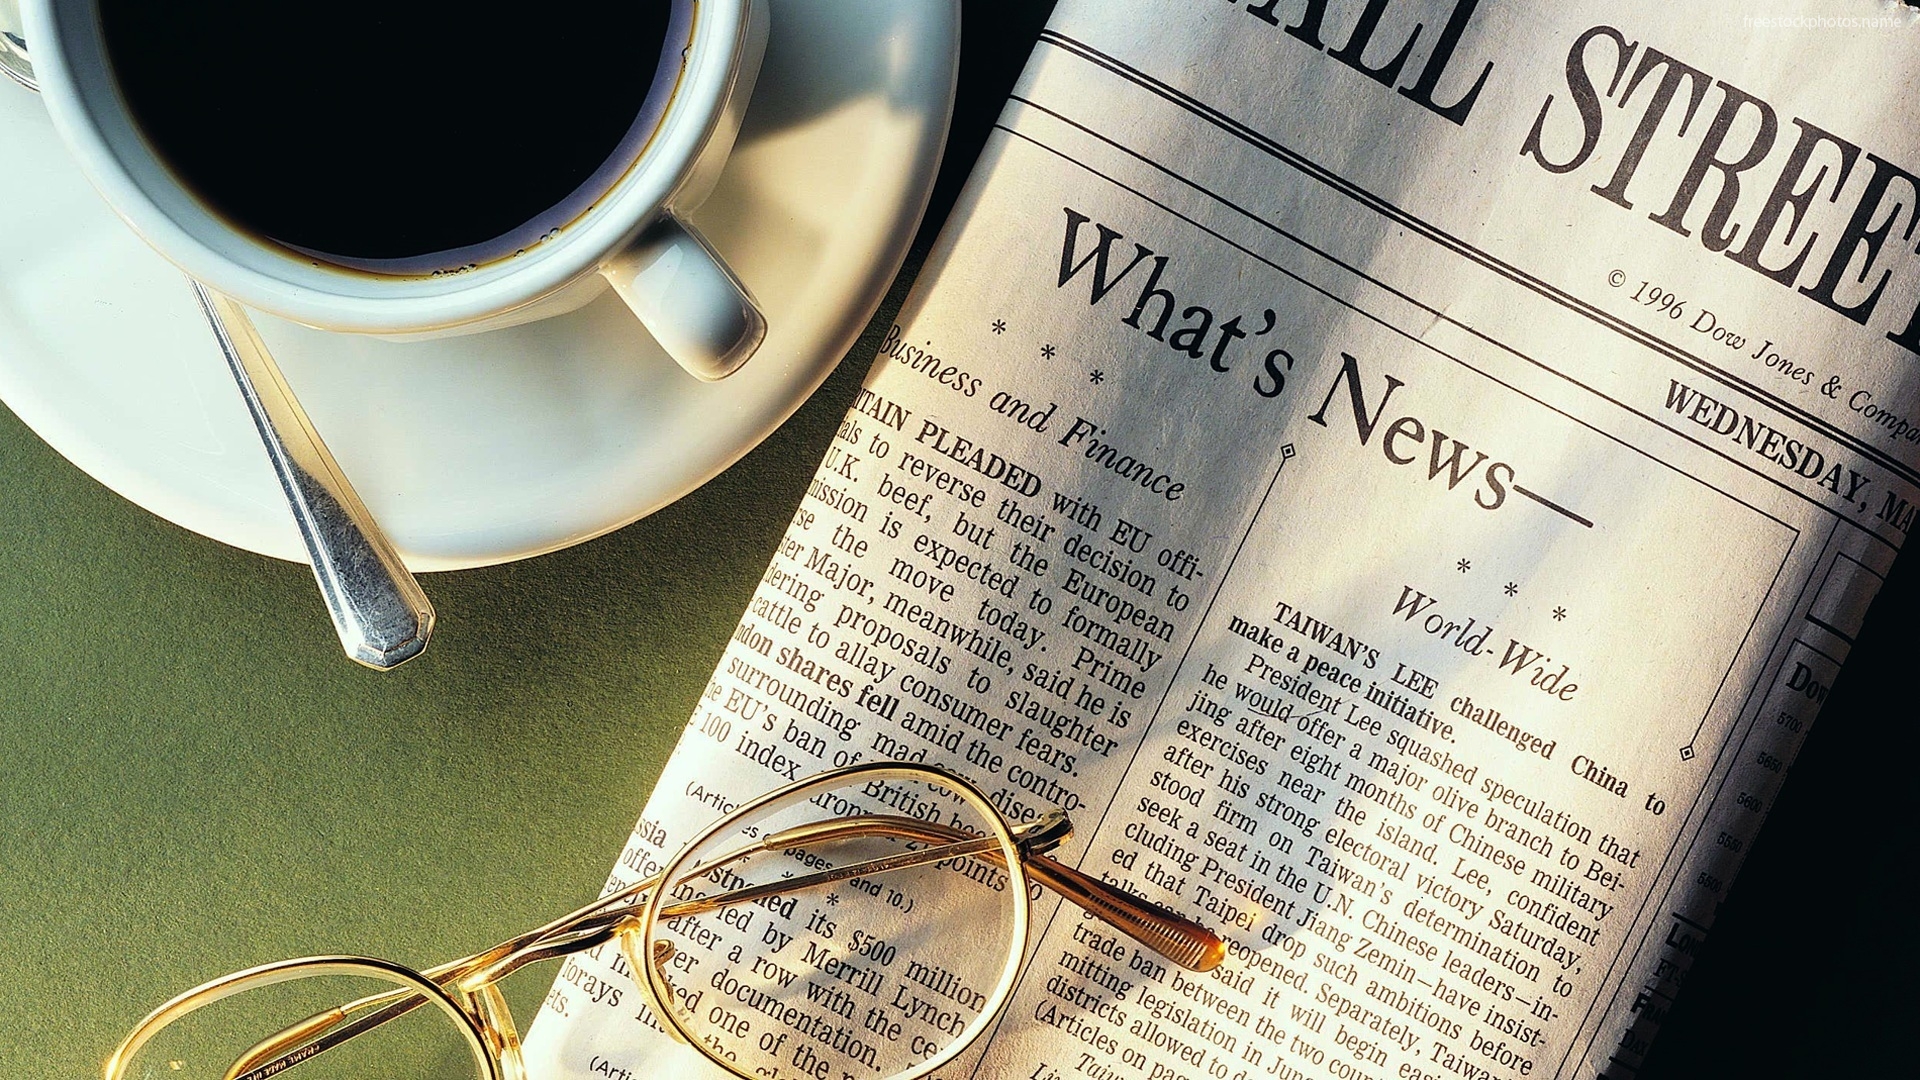 editorial-newspaper-eyeglasses-and-cup-of-coffee-88